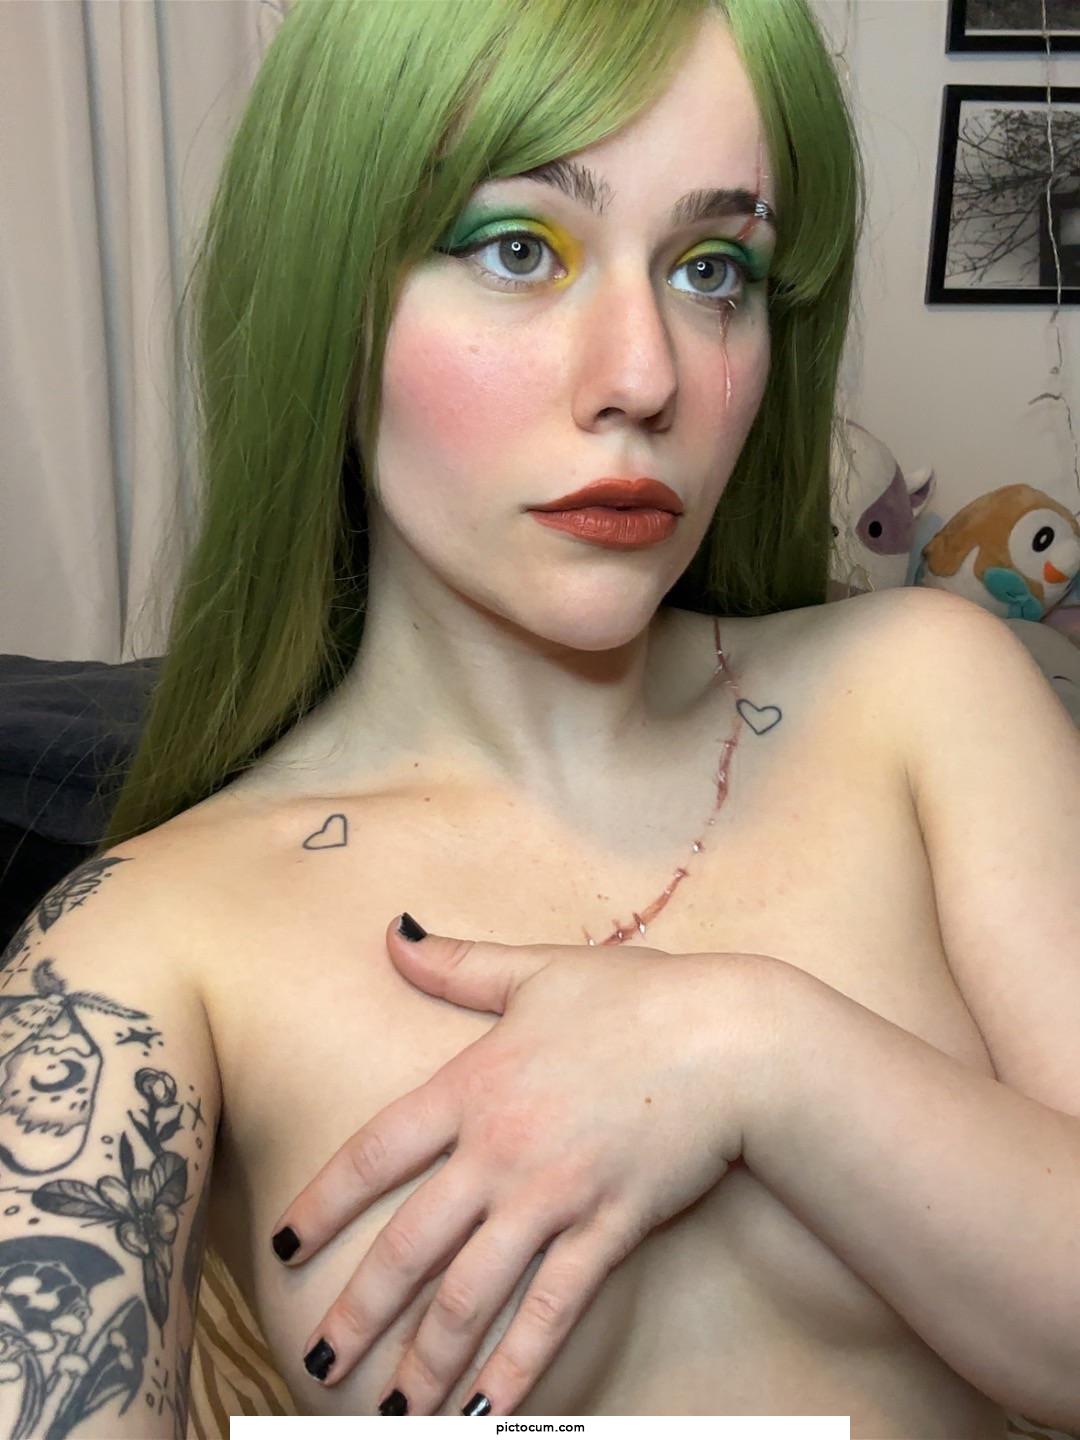 What would you do to me ? 💚